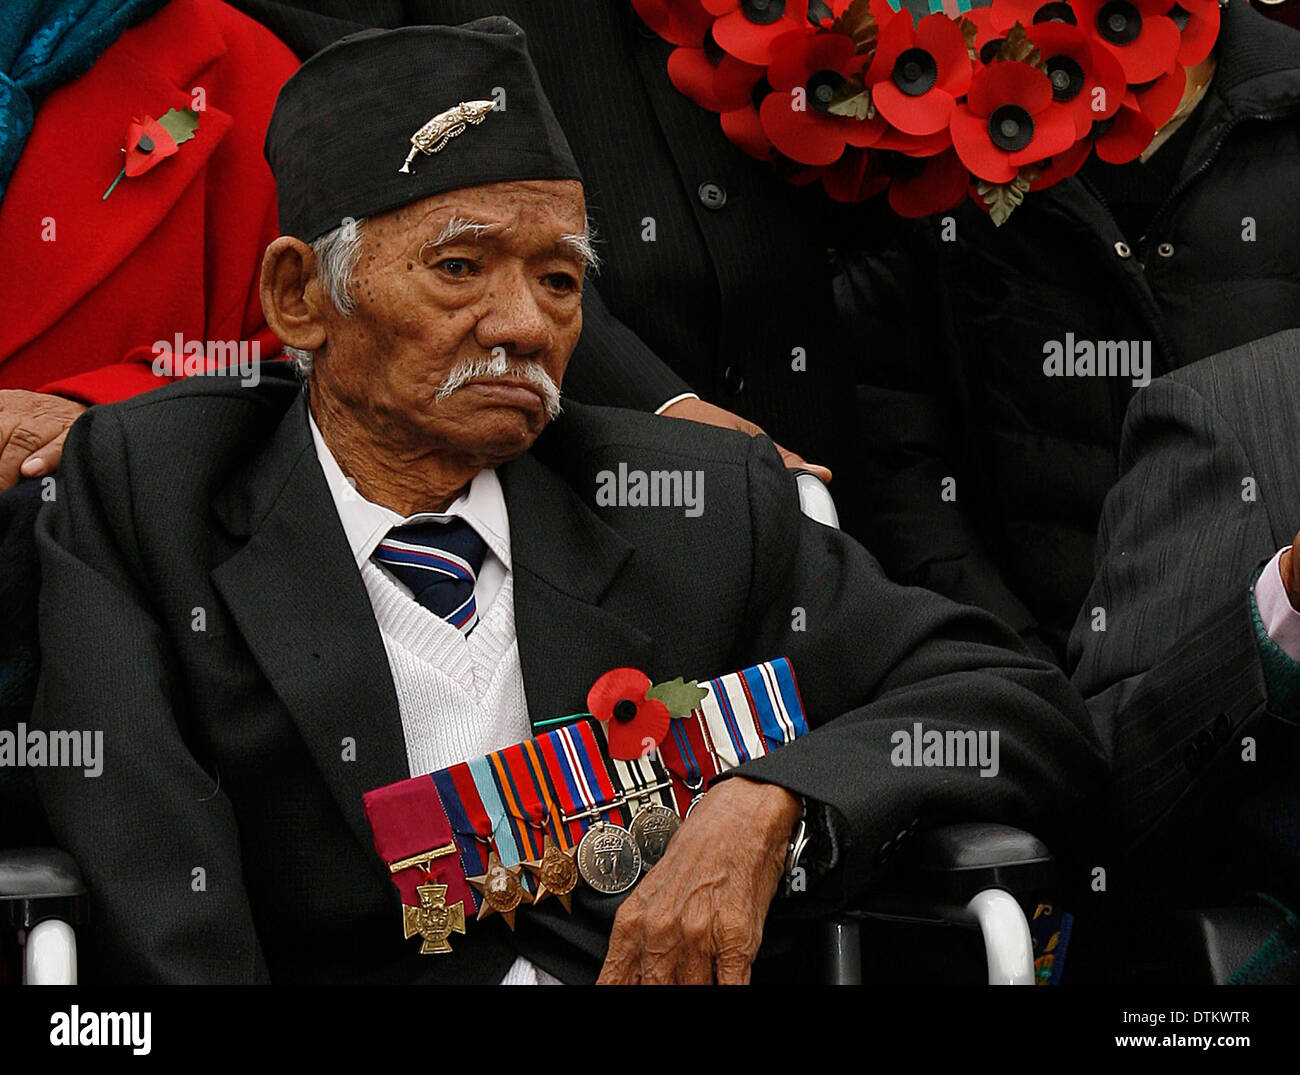 Lachhiman Gurung VC attending rally in Parliament Square over Gurkha rights Stock Photo